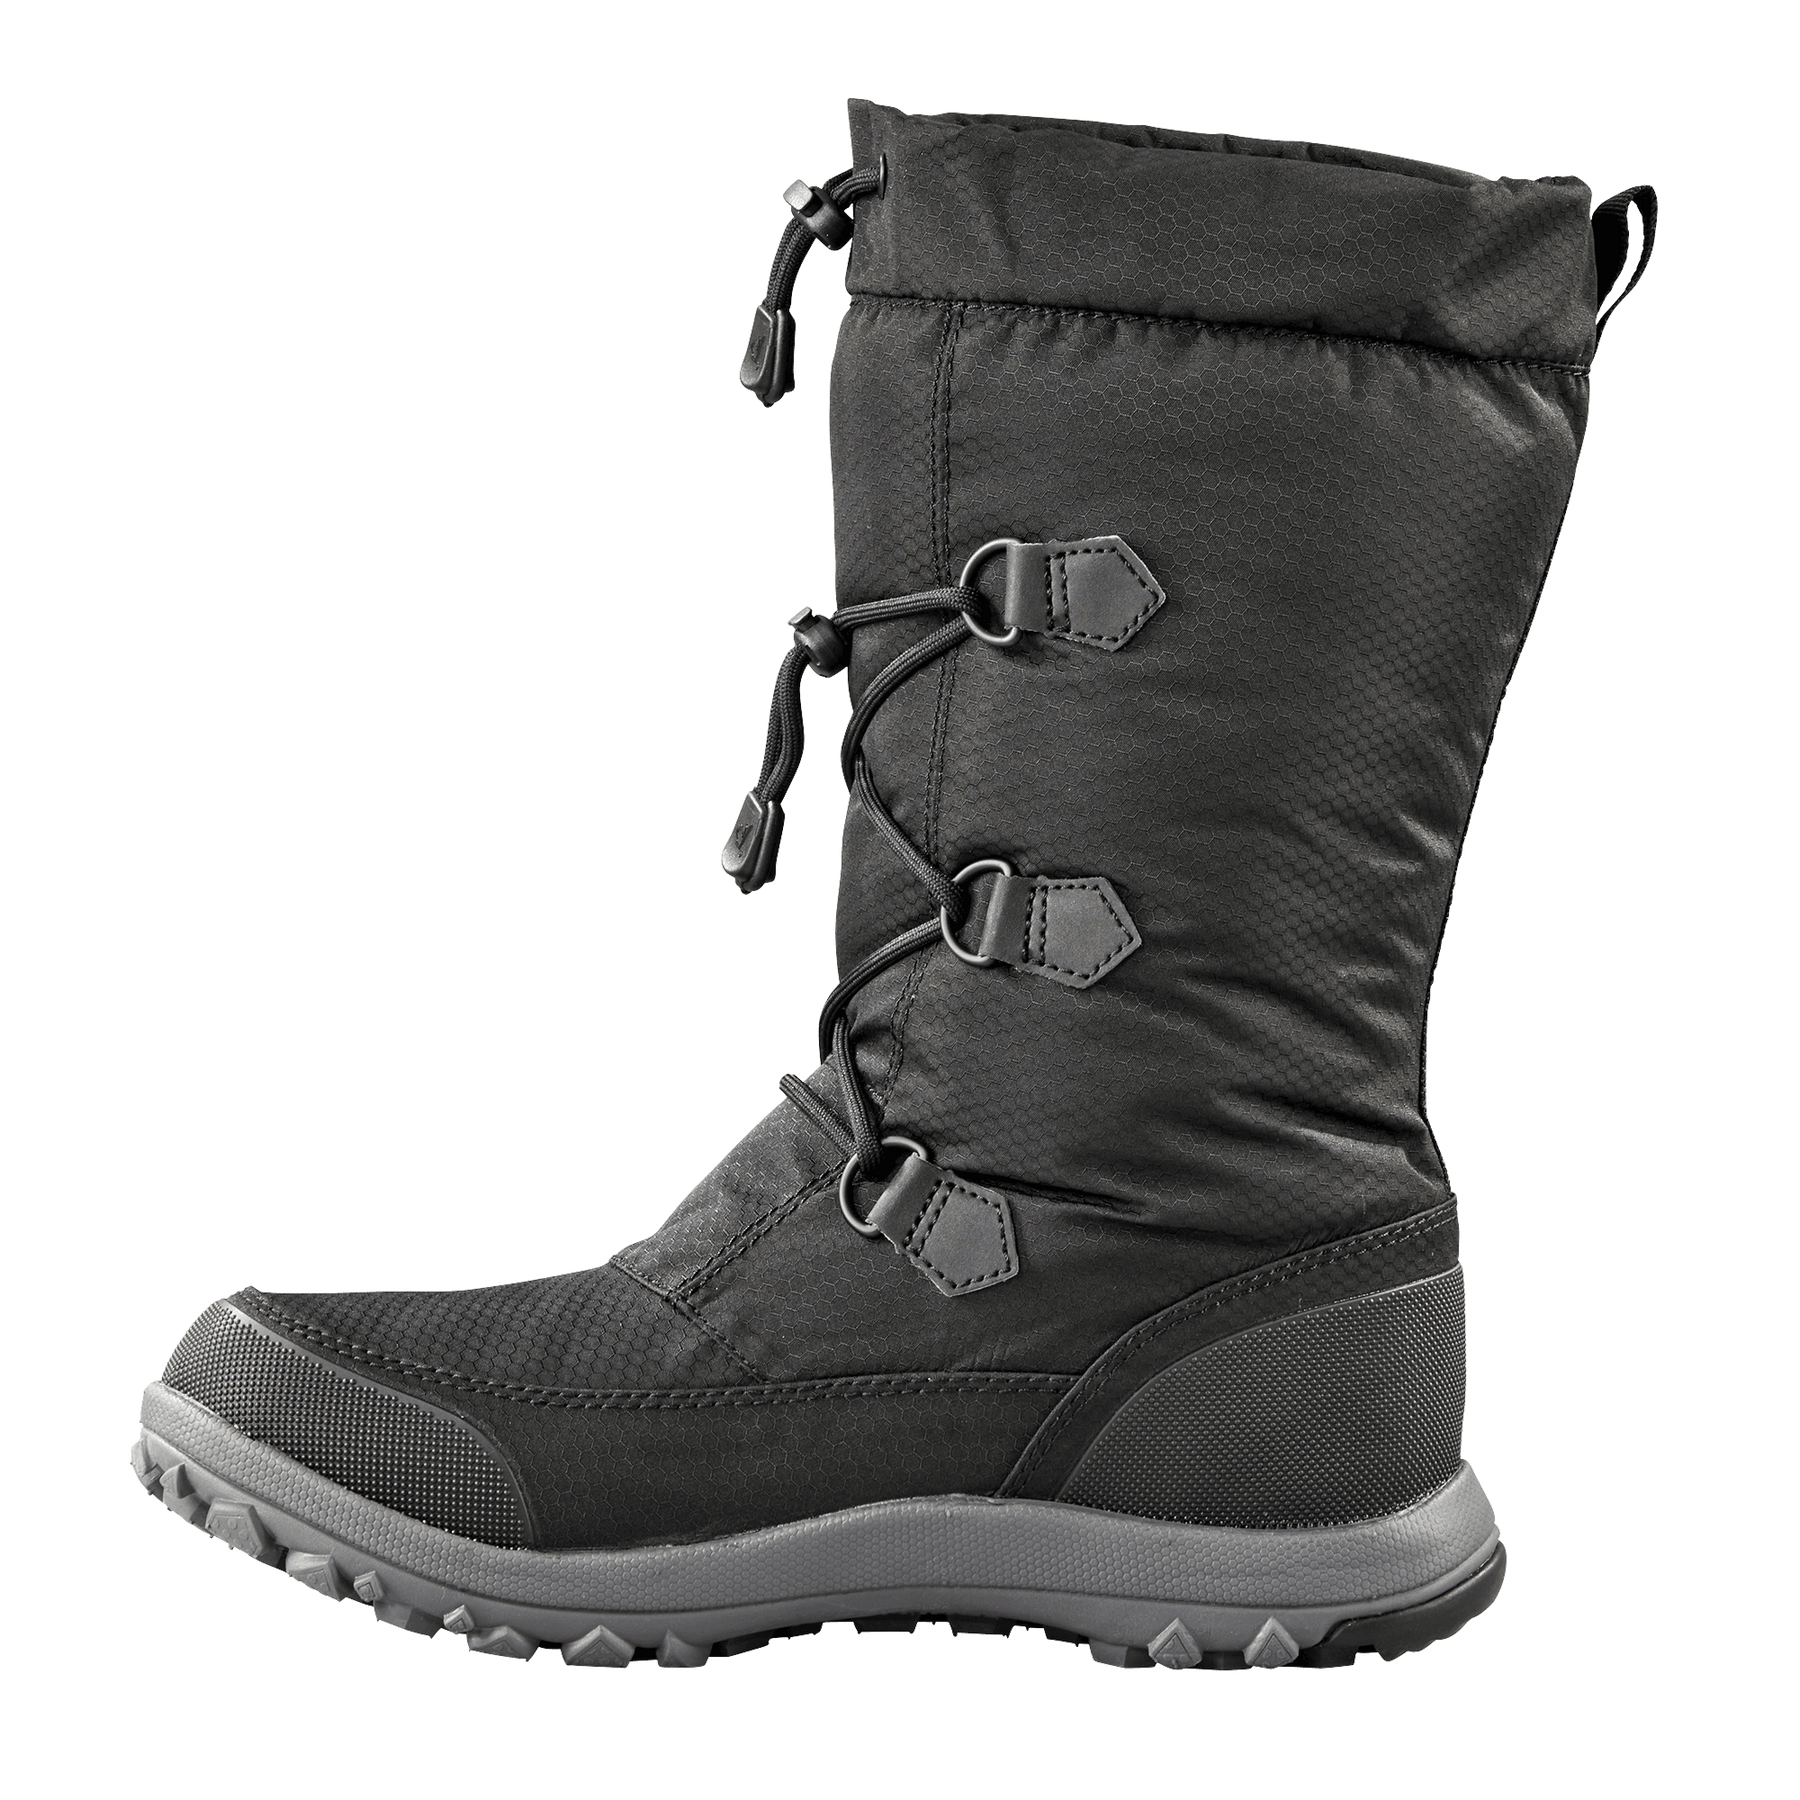 LIGHT | Women's Boot – Baffin - Born in the North '79